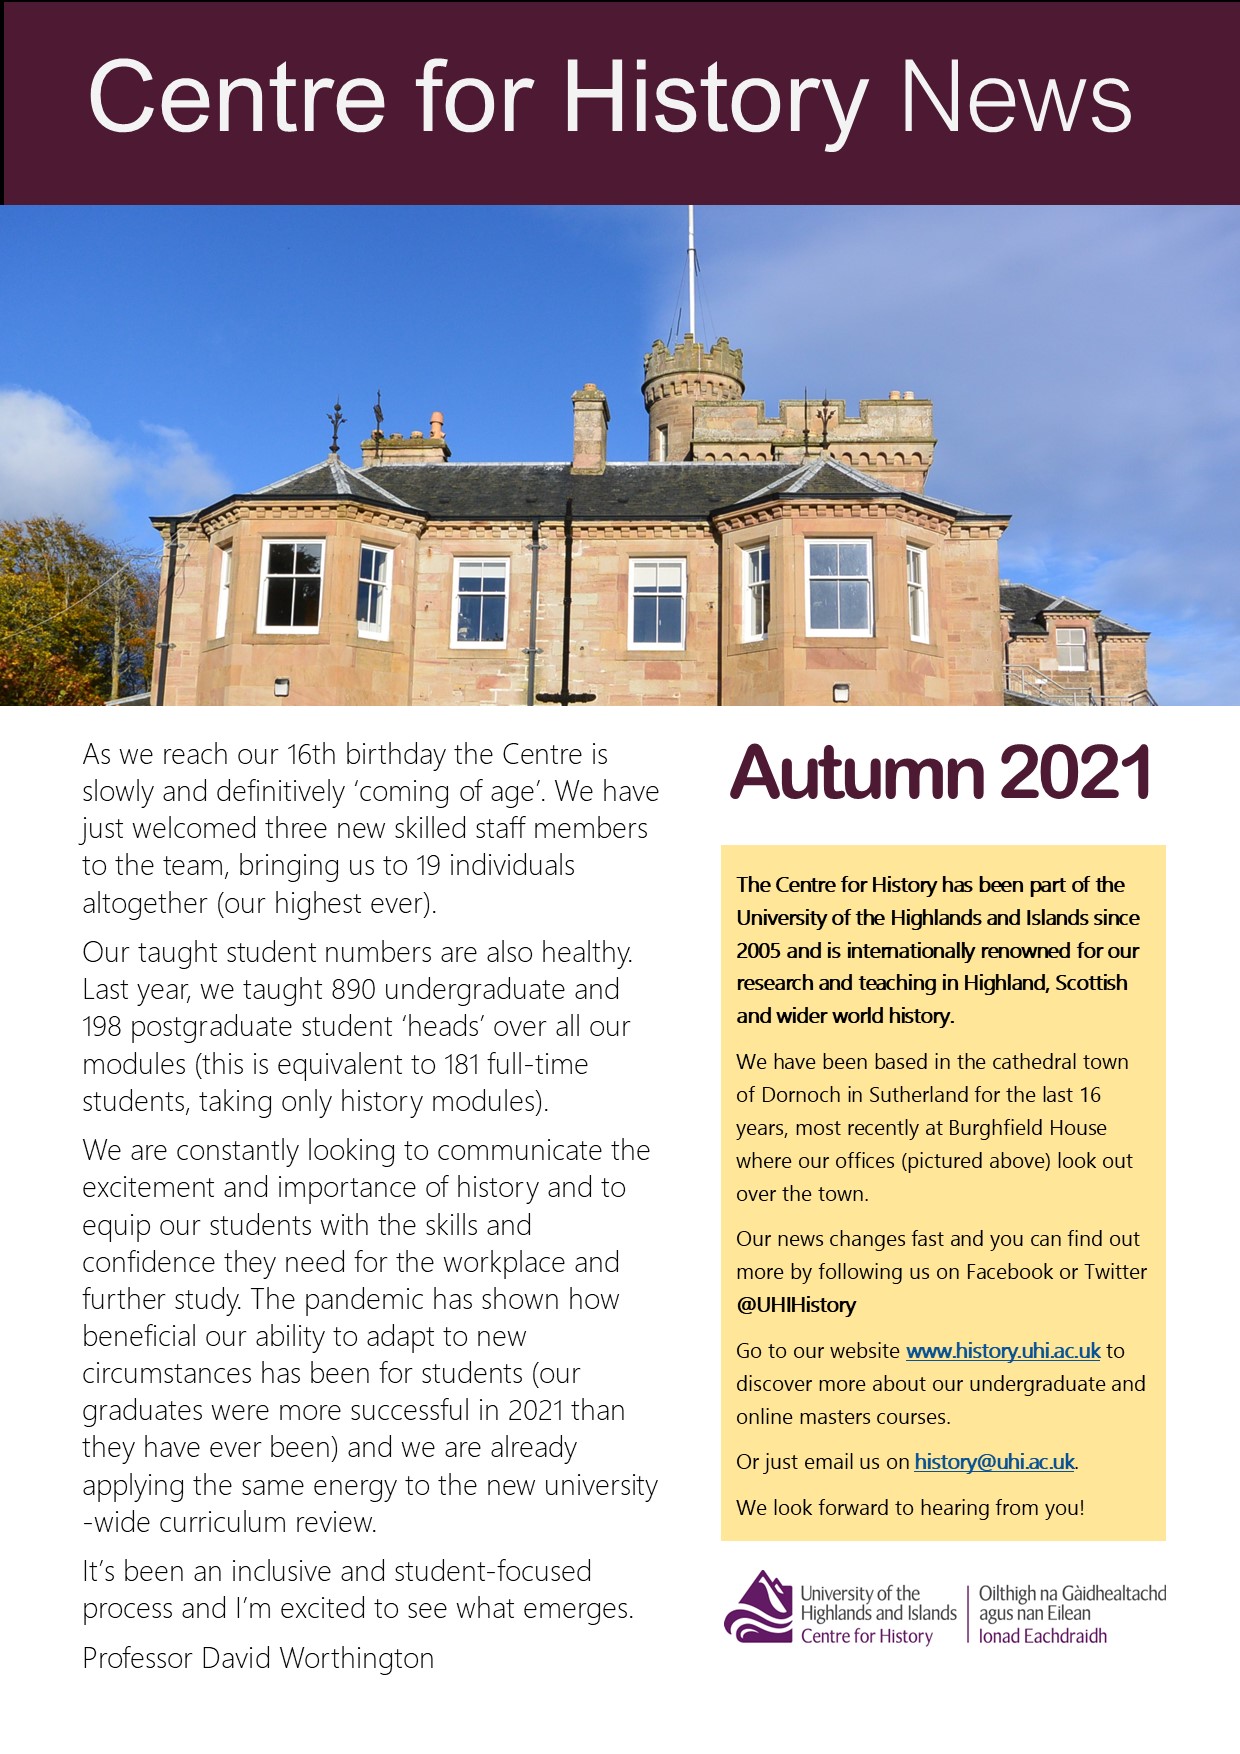 front page image of the centre's autumn 2021 newsletter